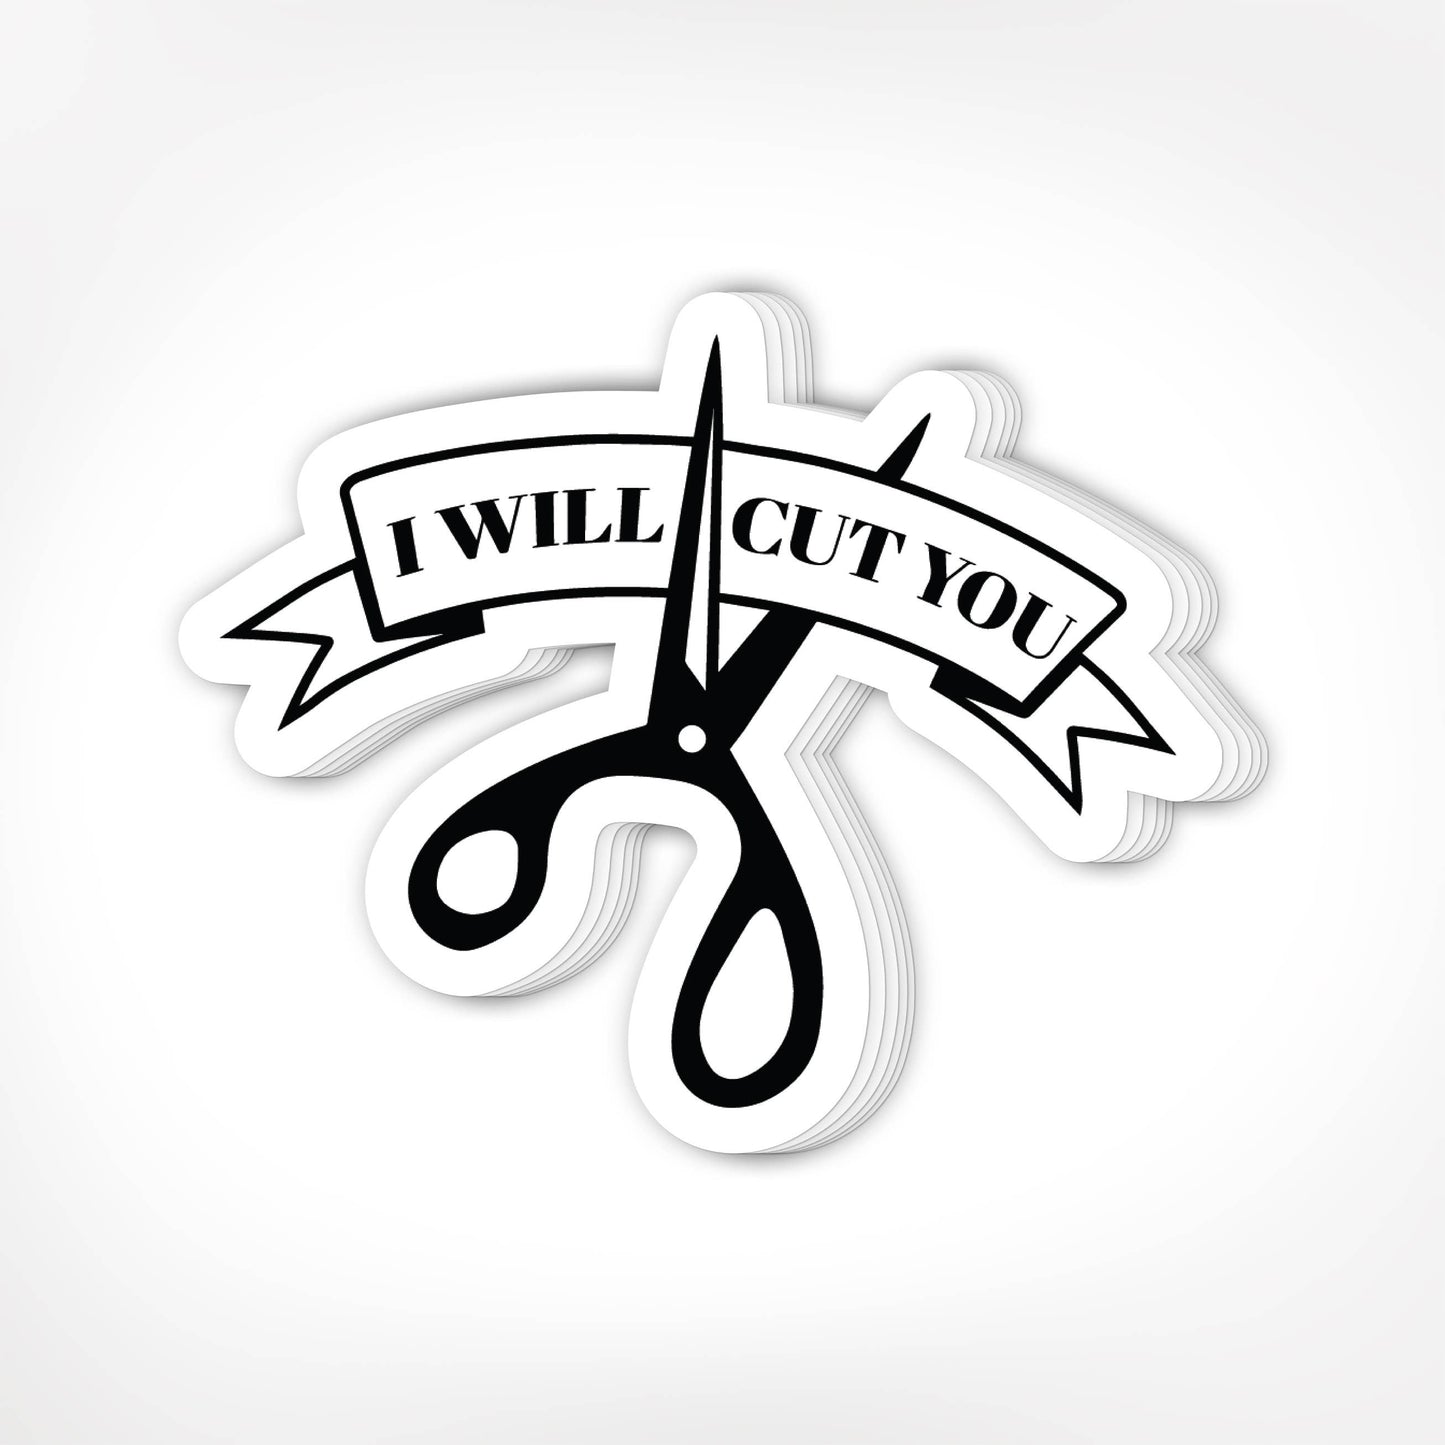 I Will Cut You Stickers - Mellow Monkey